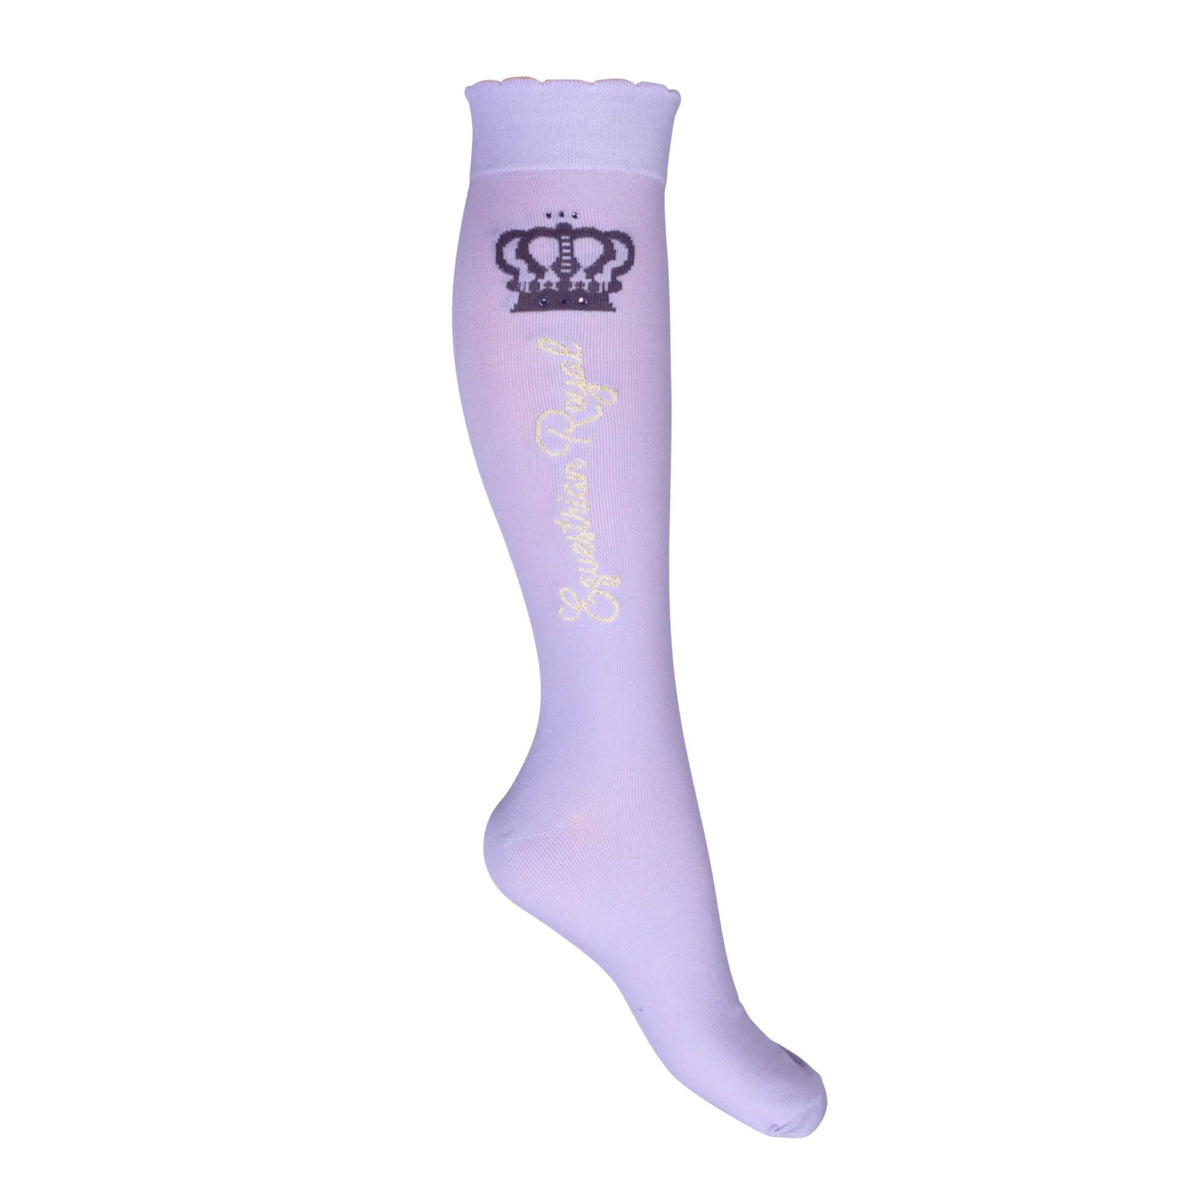 Lavender Bay socks in the colour Lavender detailing the words &quot;equestrian royal&quot; down the side aswell as a crown and diamantes at the top of the socks.